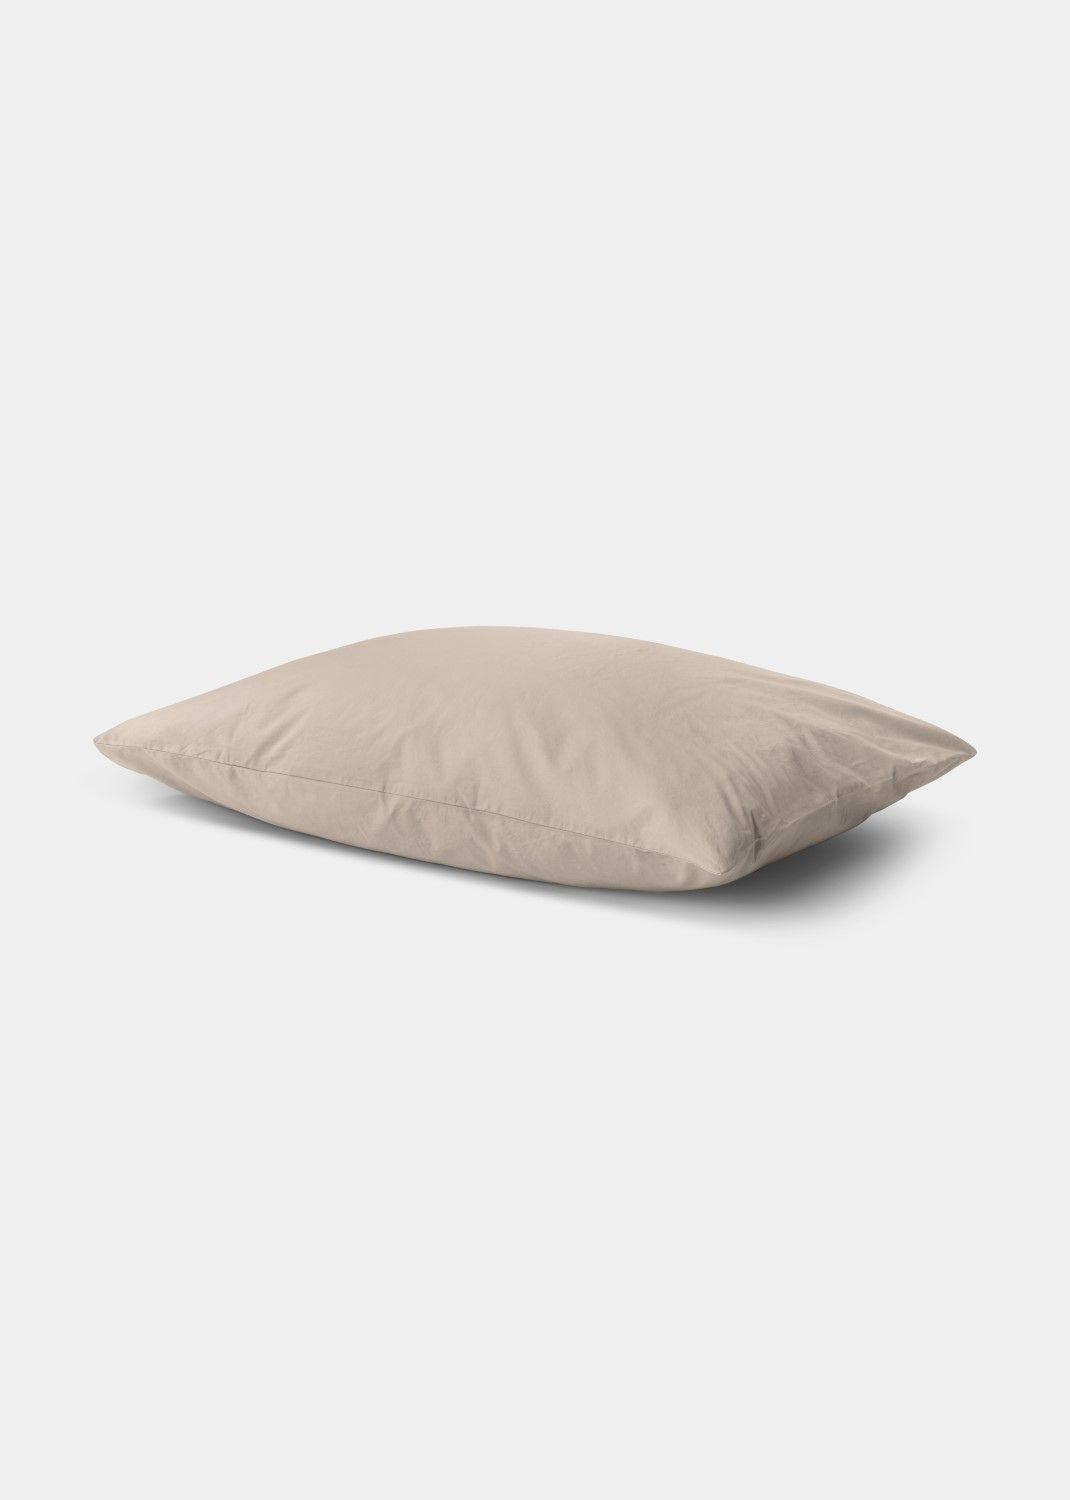 Sekan Studio Cotton Percale Pillow Covers - Walnut